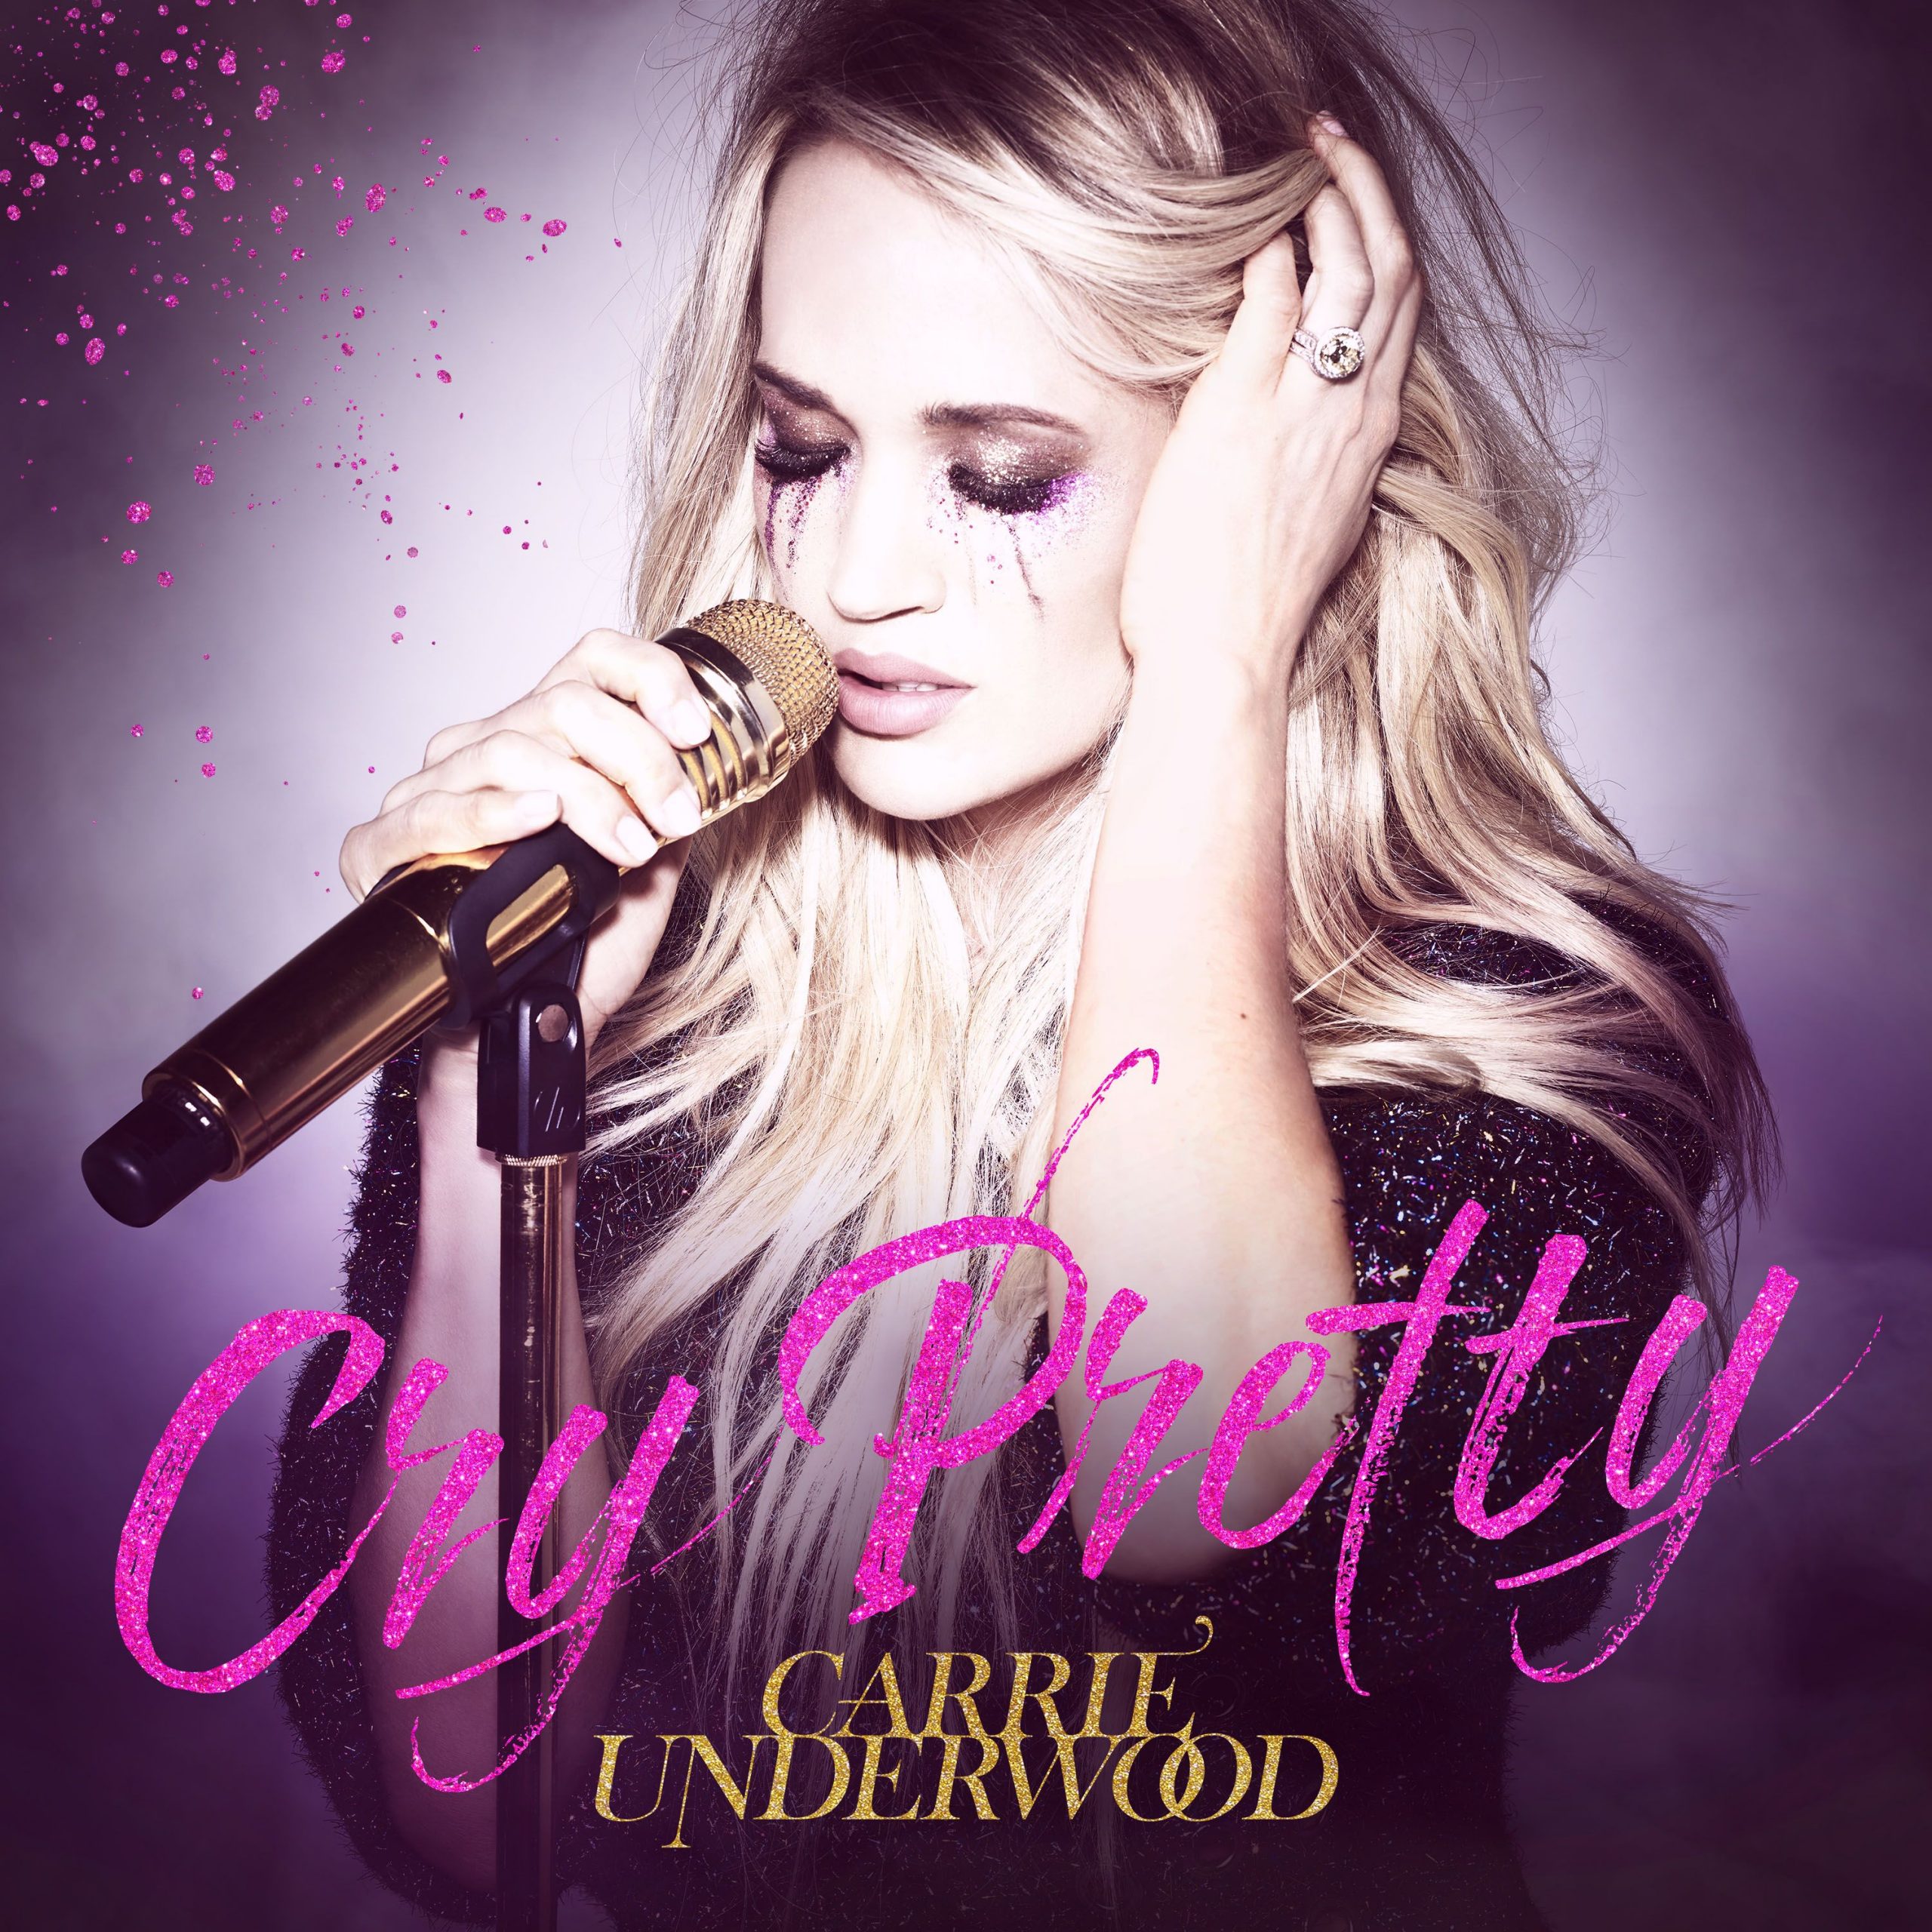 CARRIE UNDERWOOD TO RELEASE NEW STUDIO ALBUM CRY PRETTY ON SEPTEMBER 14